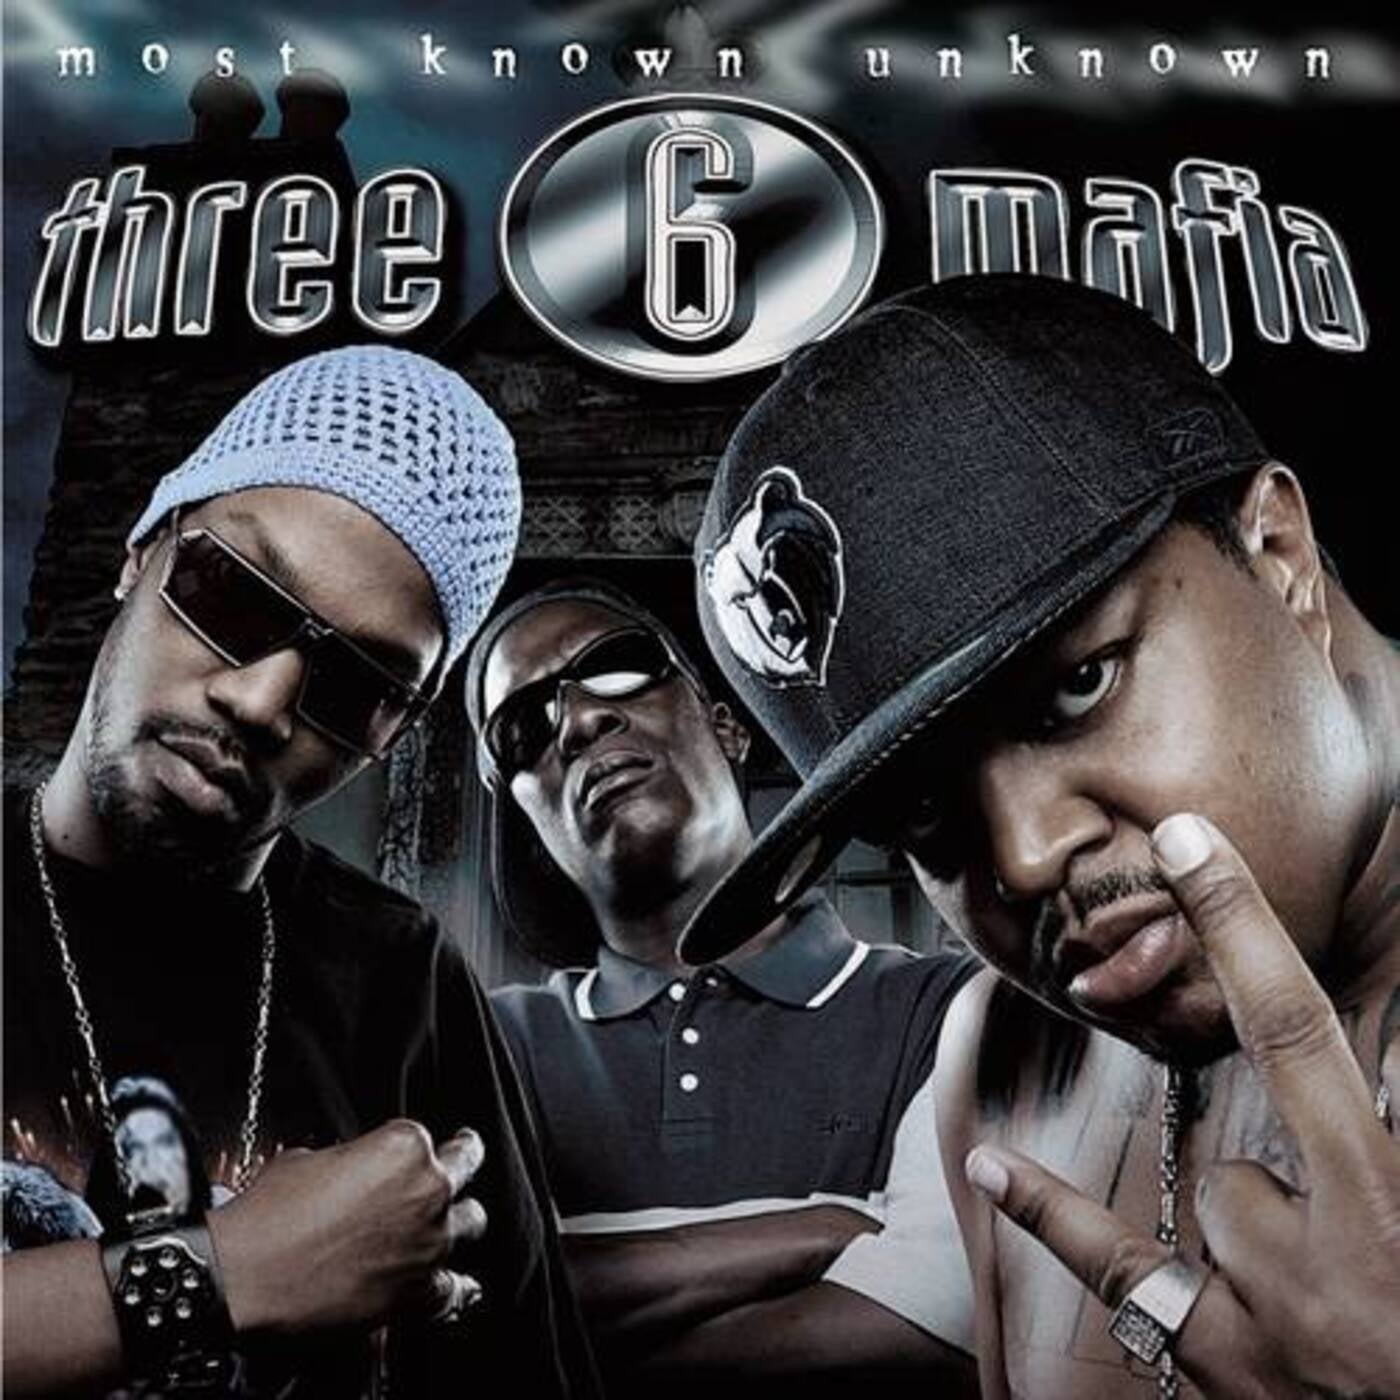 Most Known Unknown (Explicit) by Three 6 Mafia, Project Pat 